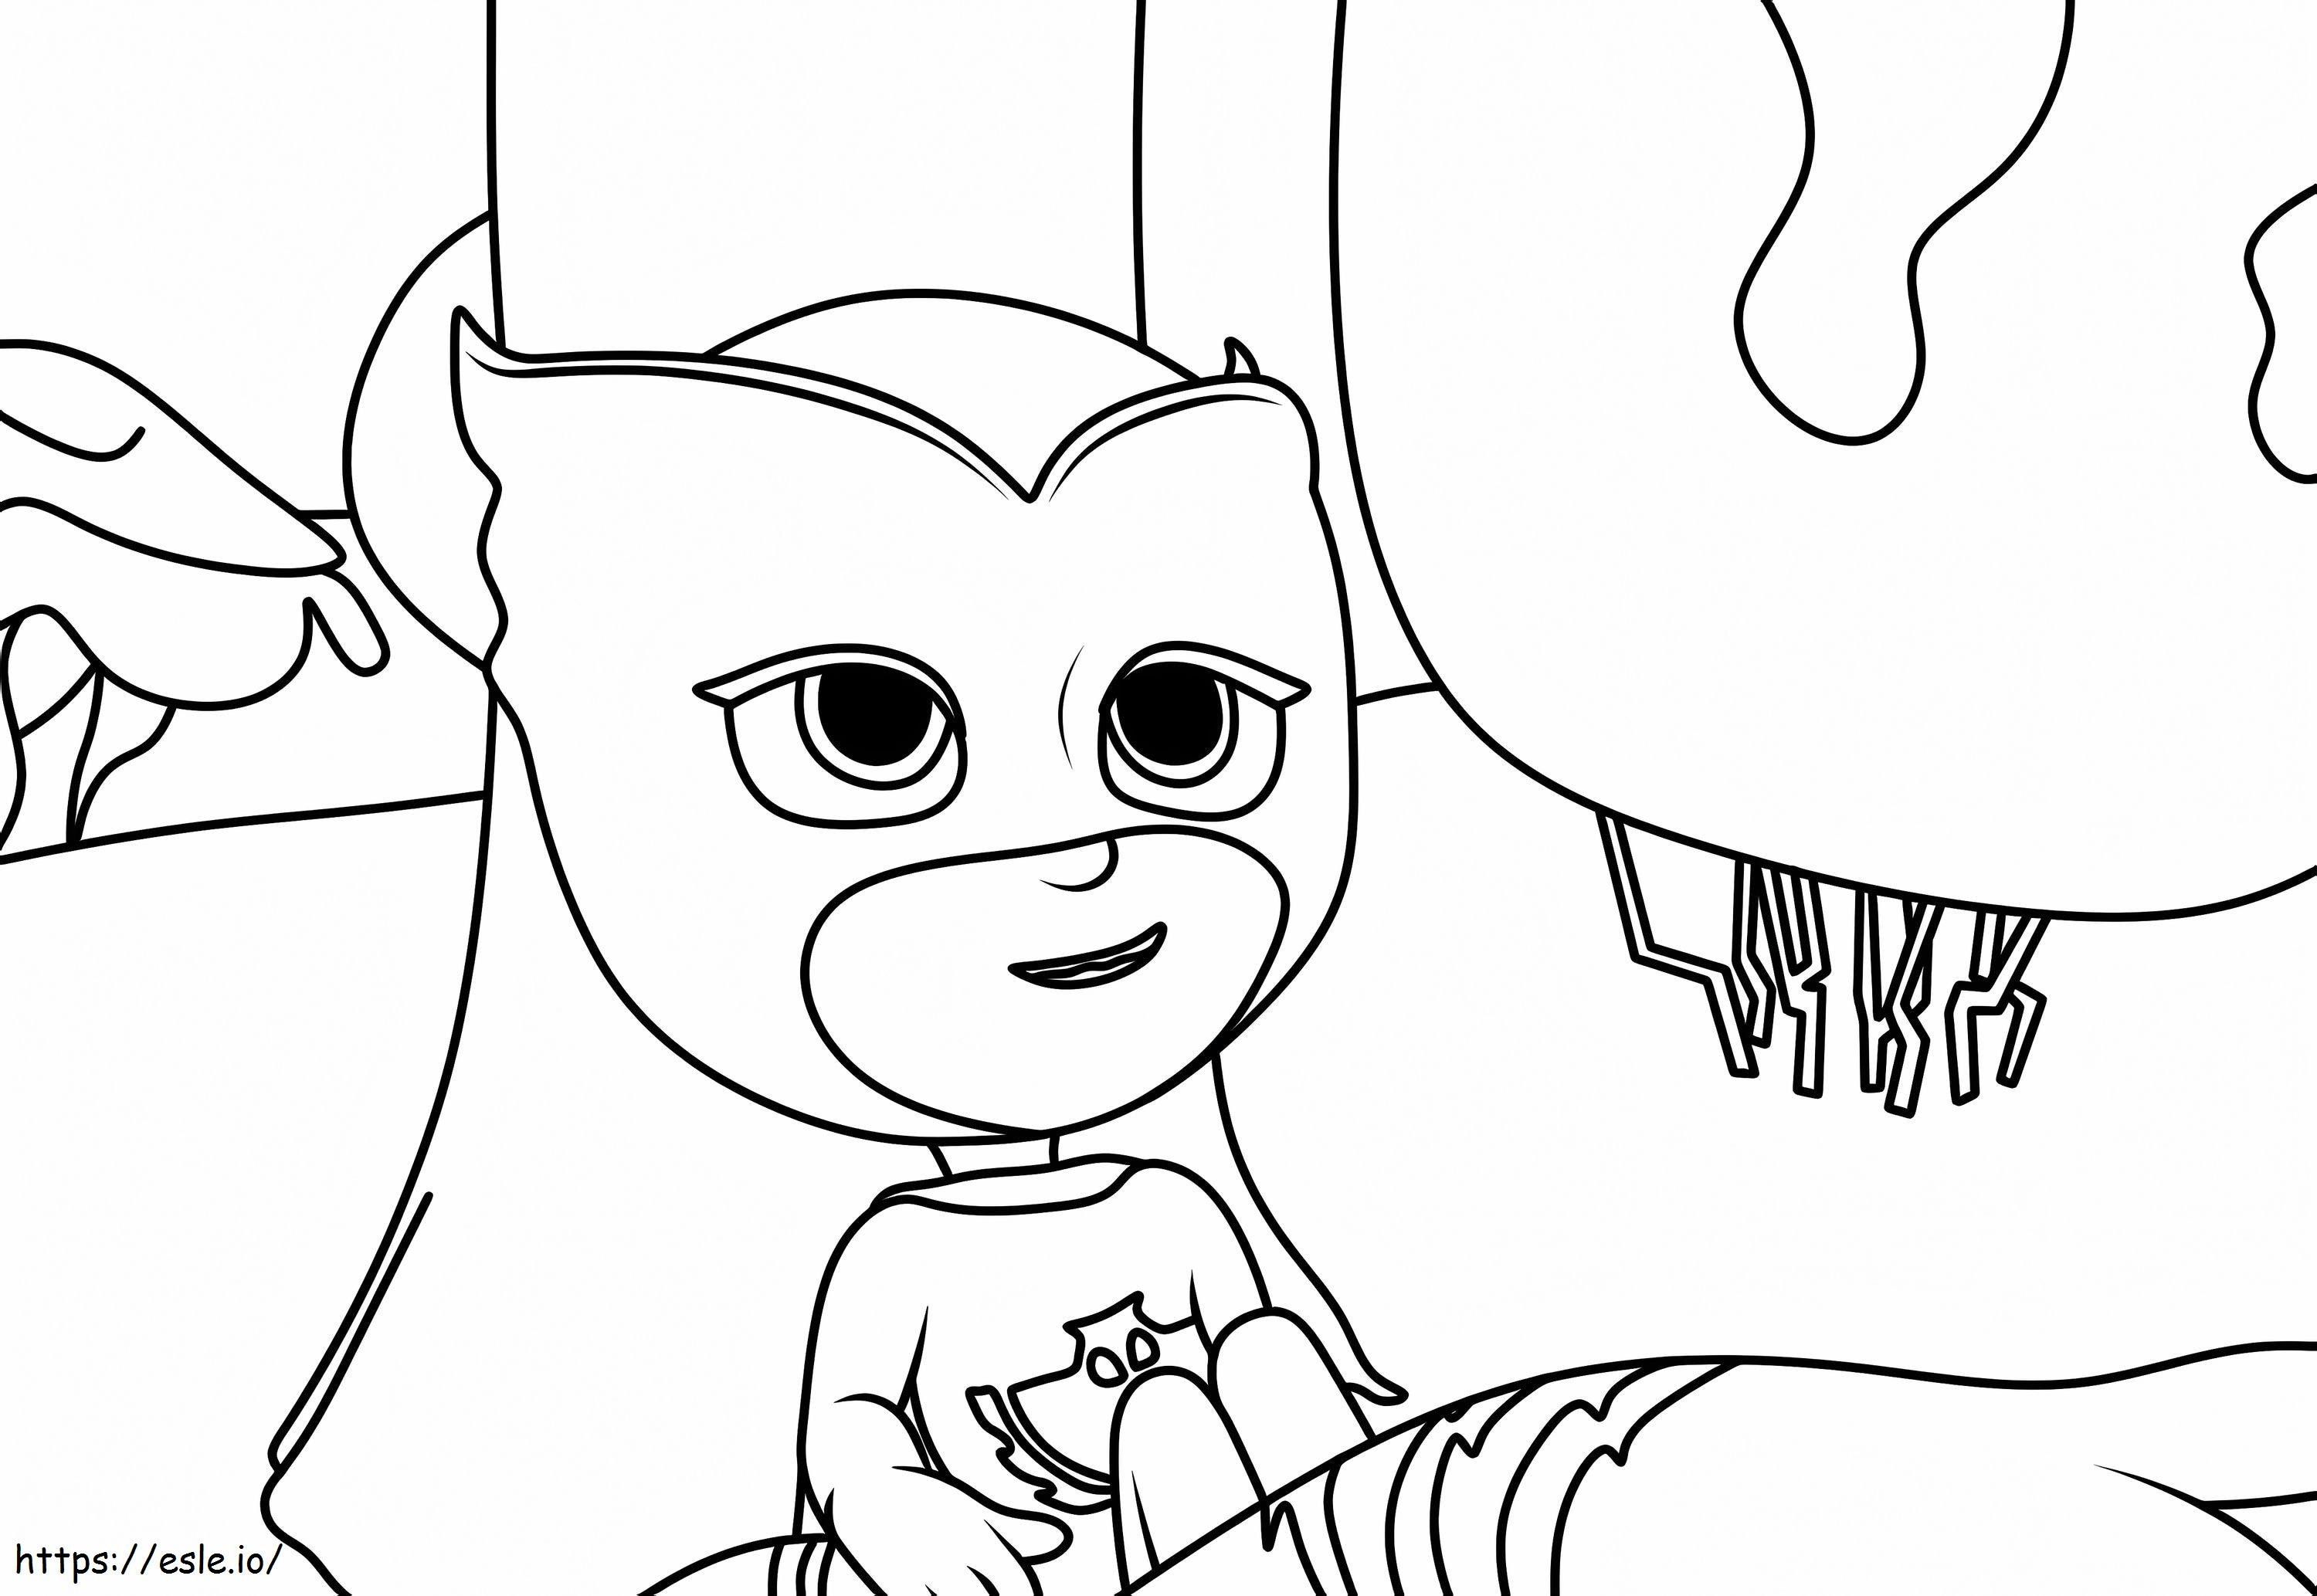 Owlette Smiling coloring page